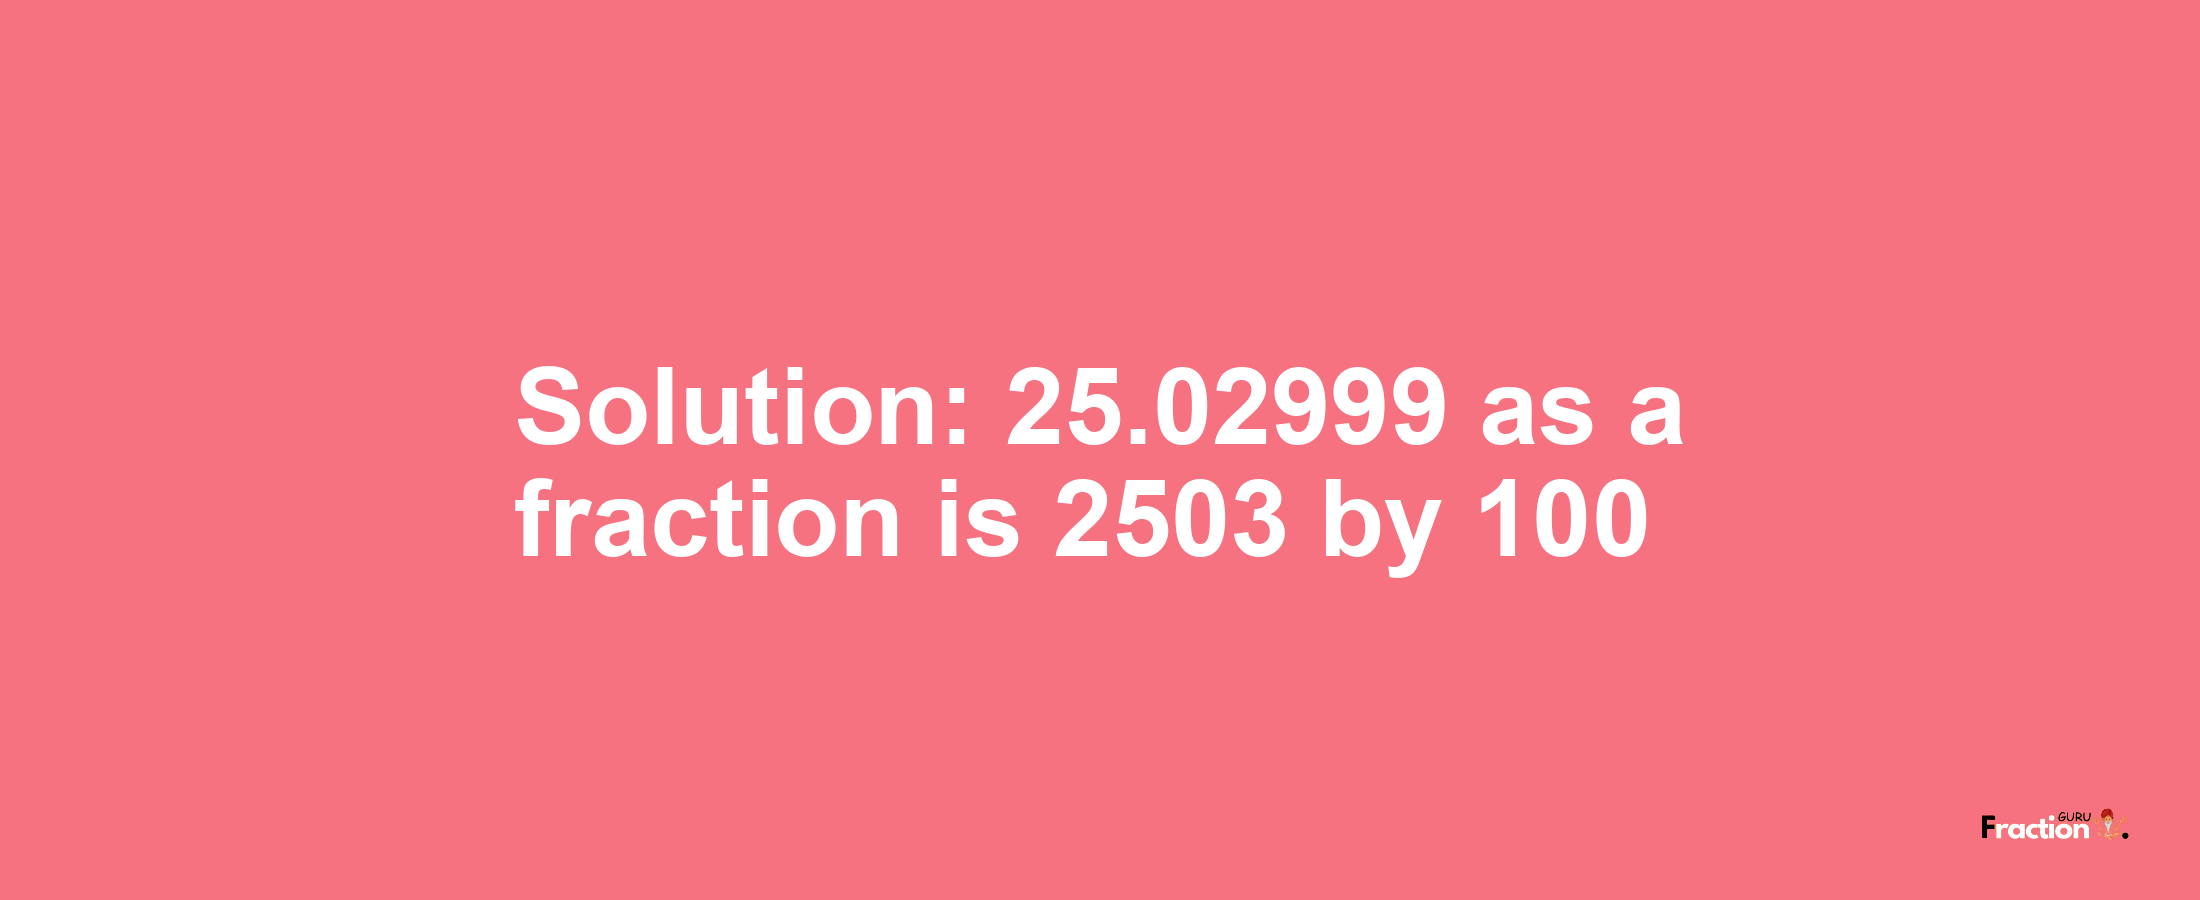 Solution:25.02999 as a fraction is 2503/100